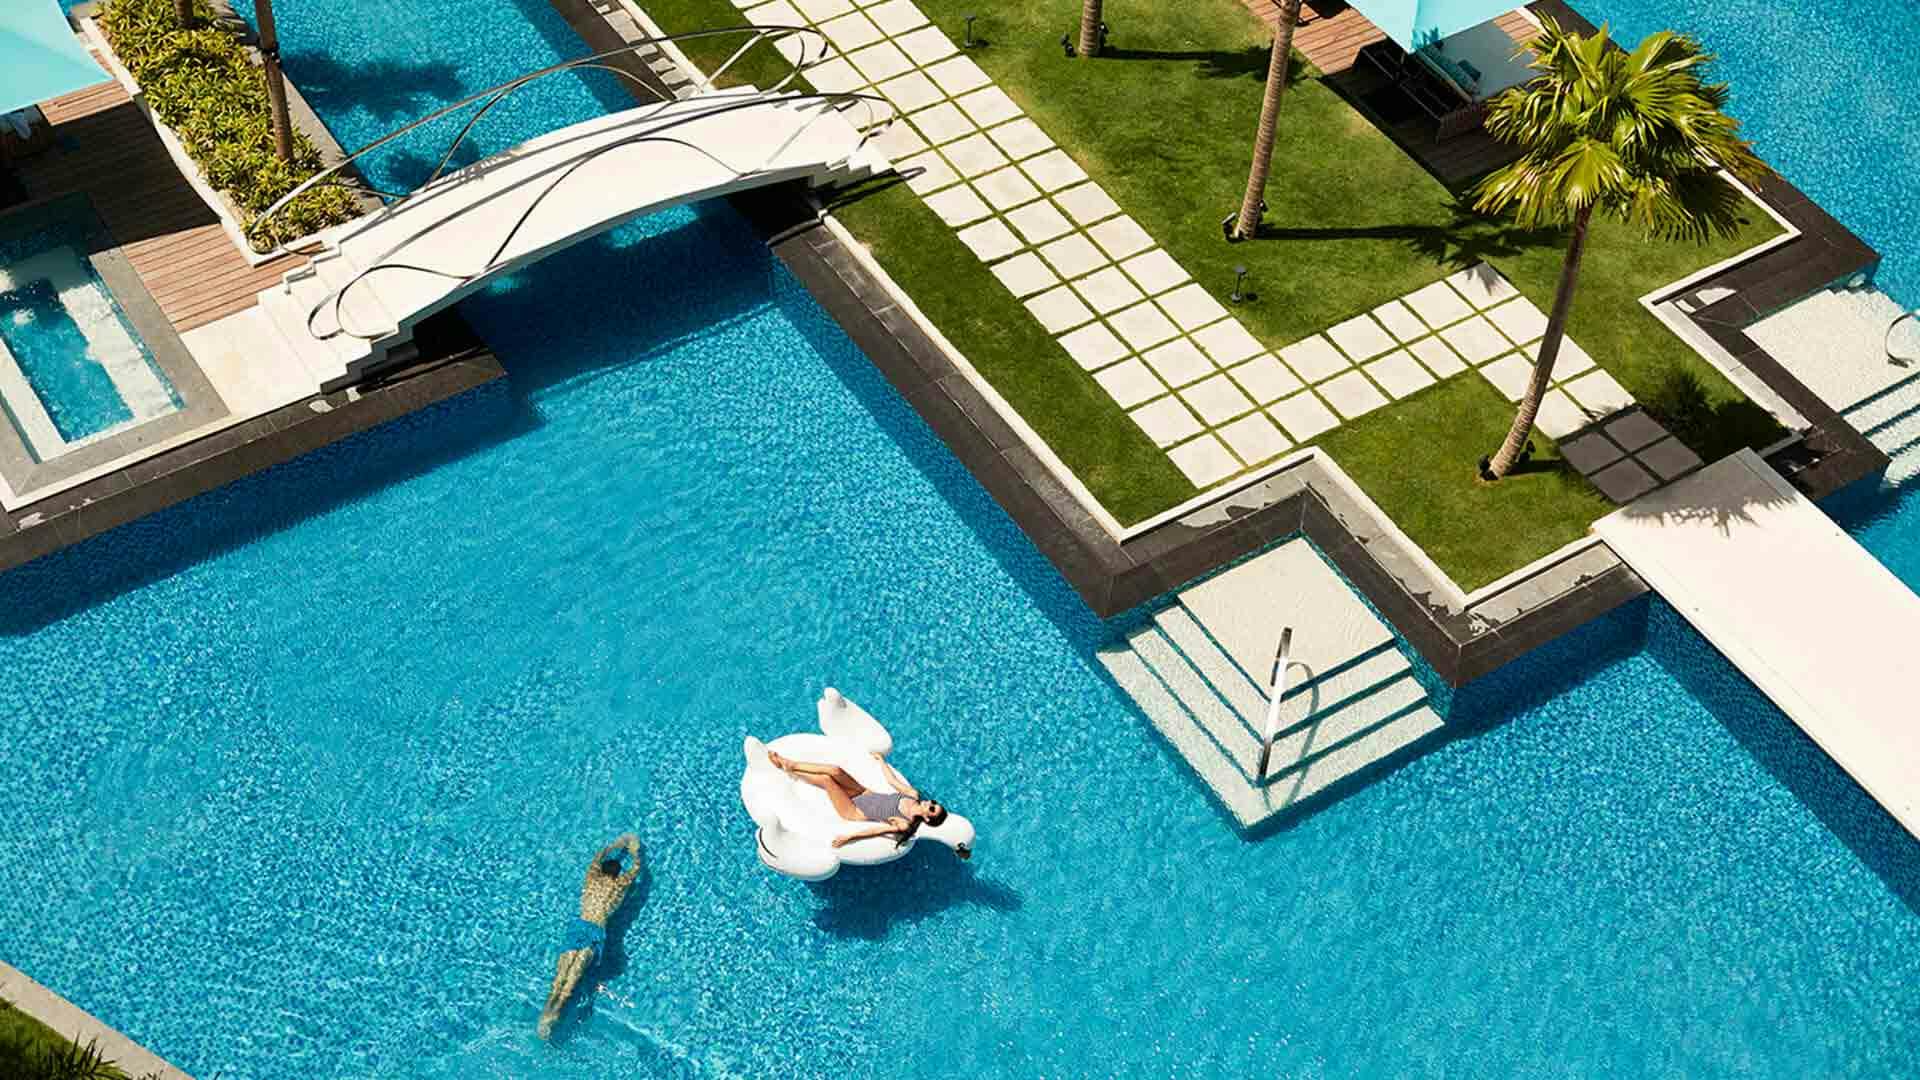 Enjoy the pool area of The Lind